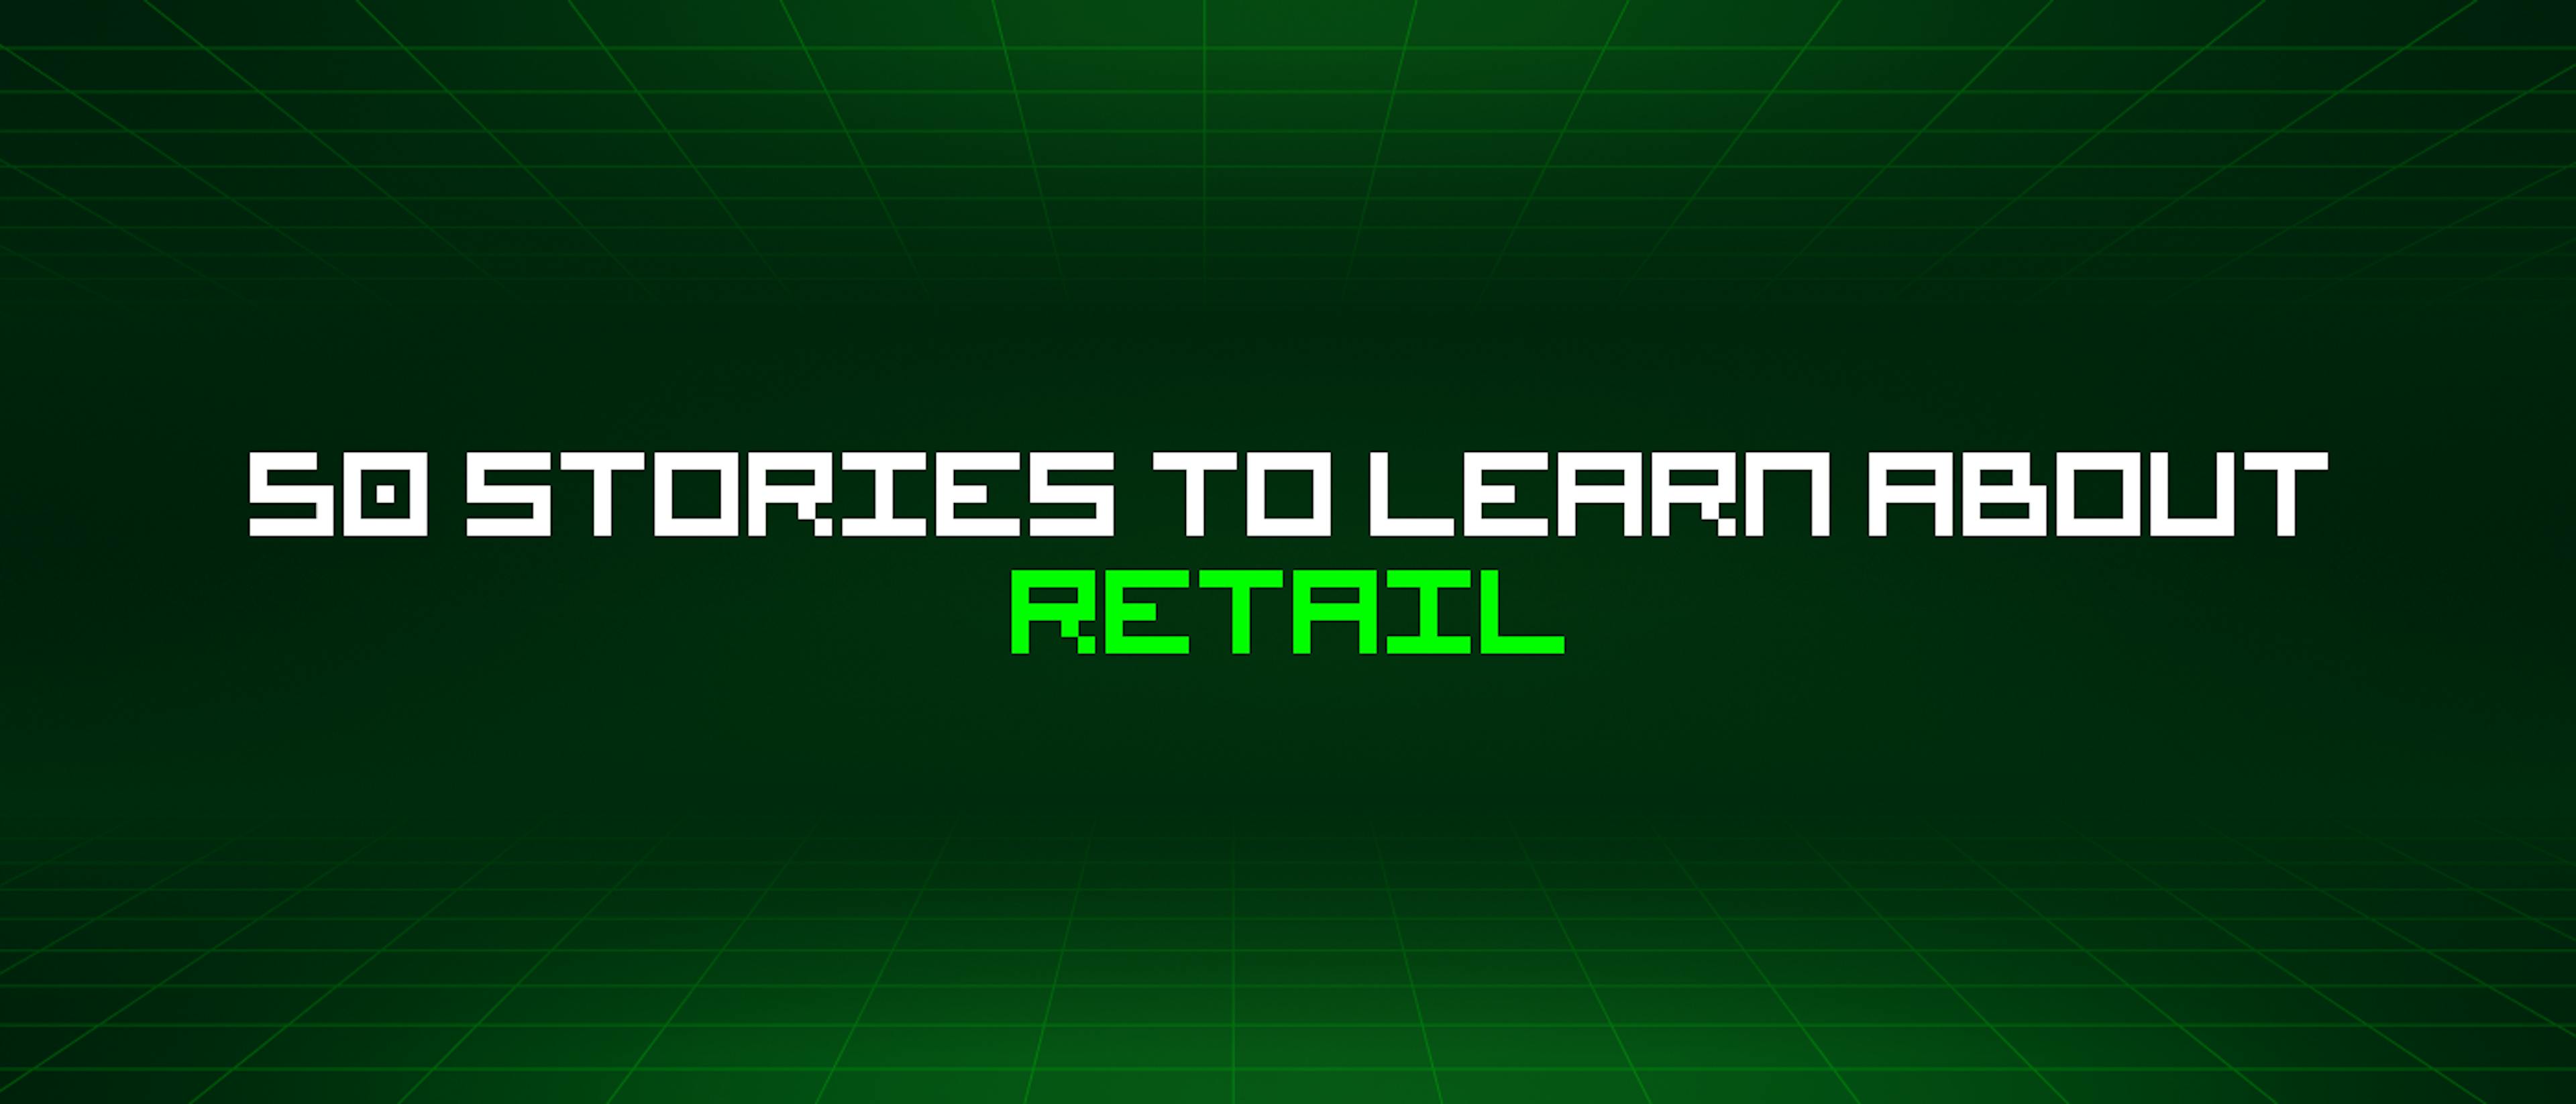 featured image - 50 Stories To Learn About Retail